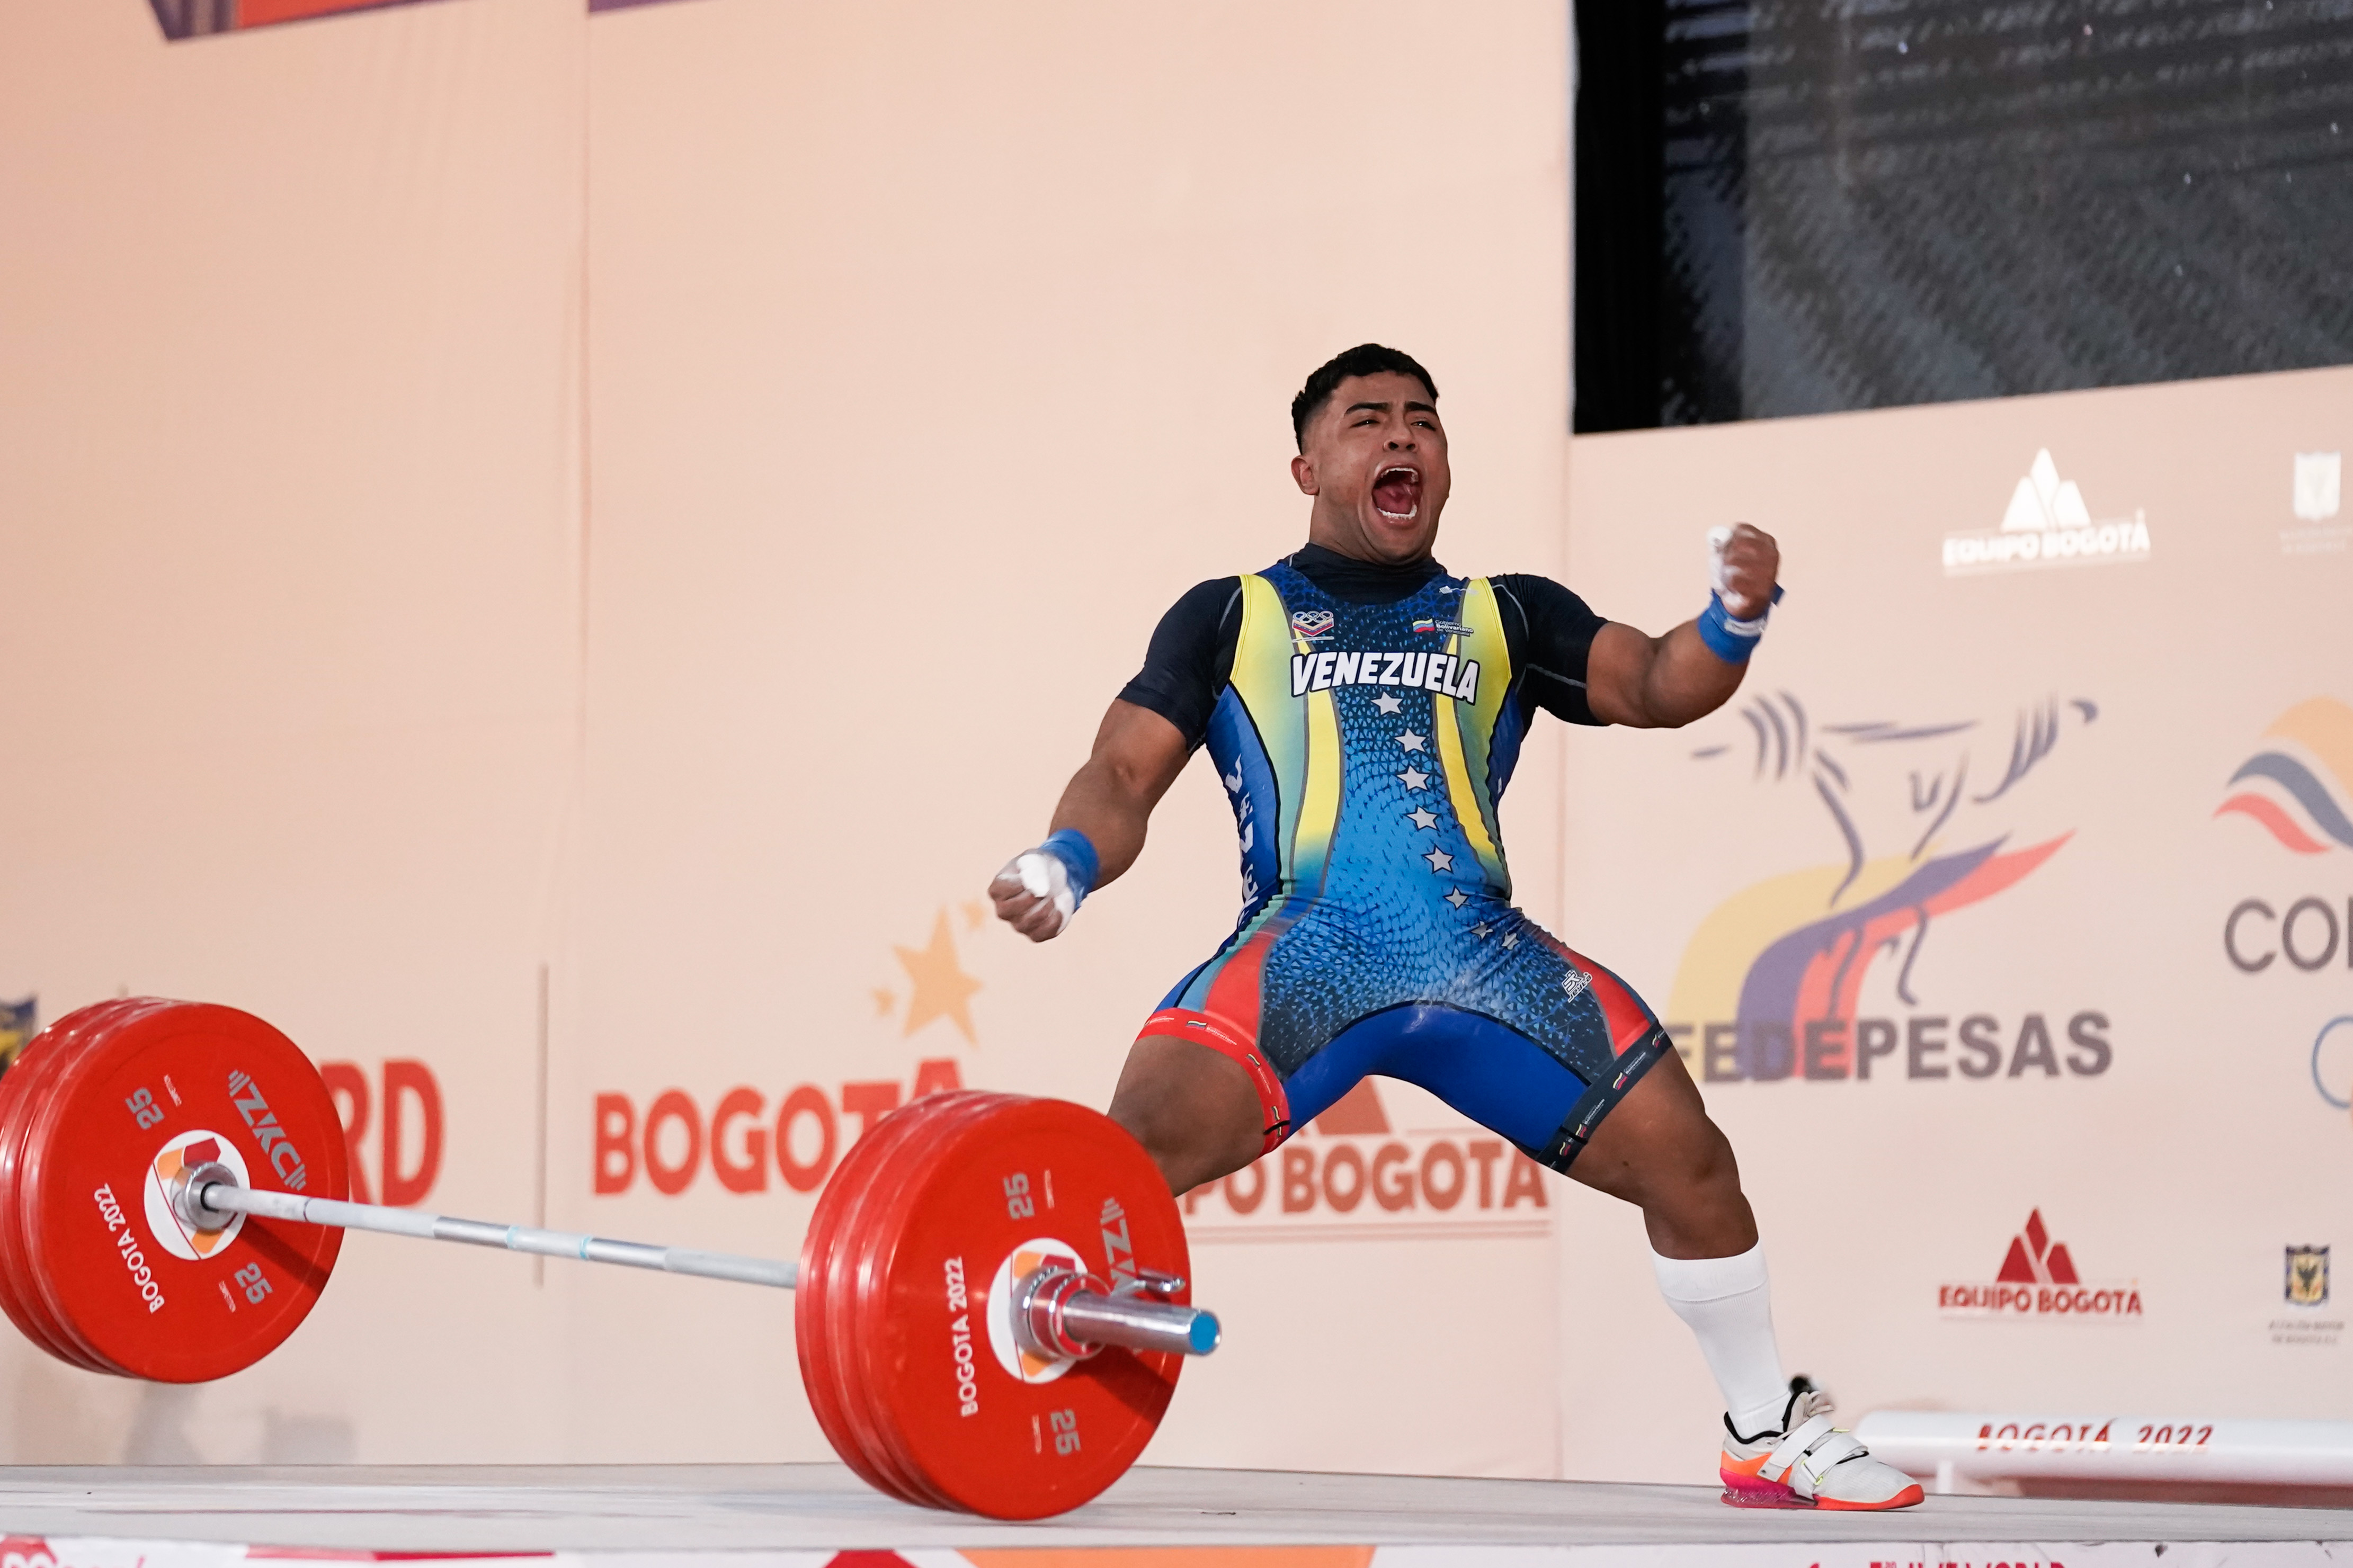 Bombout, then a world record for teenager Nasar at weightlifting World